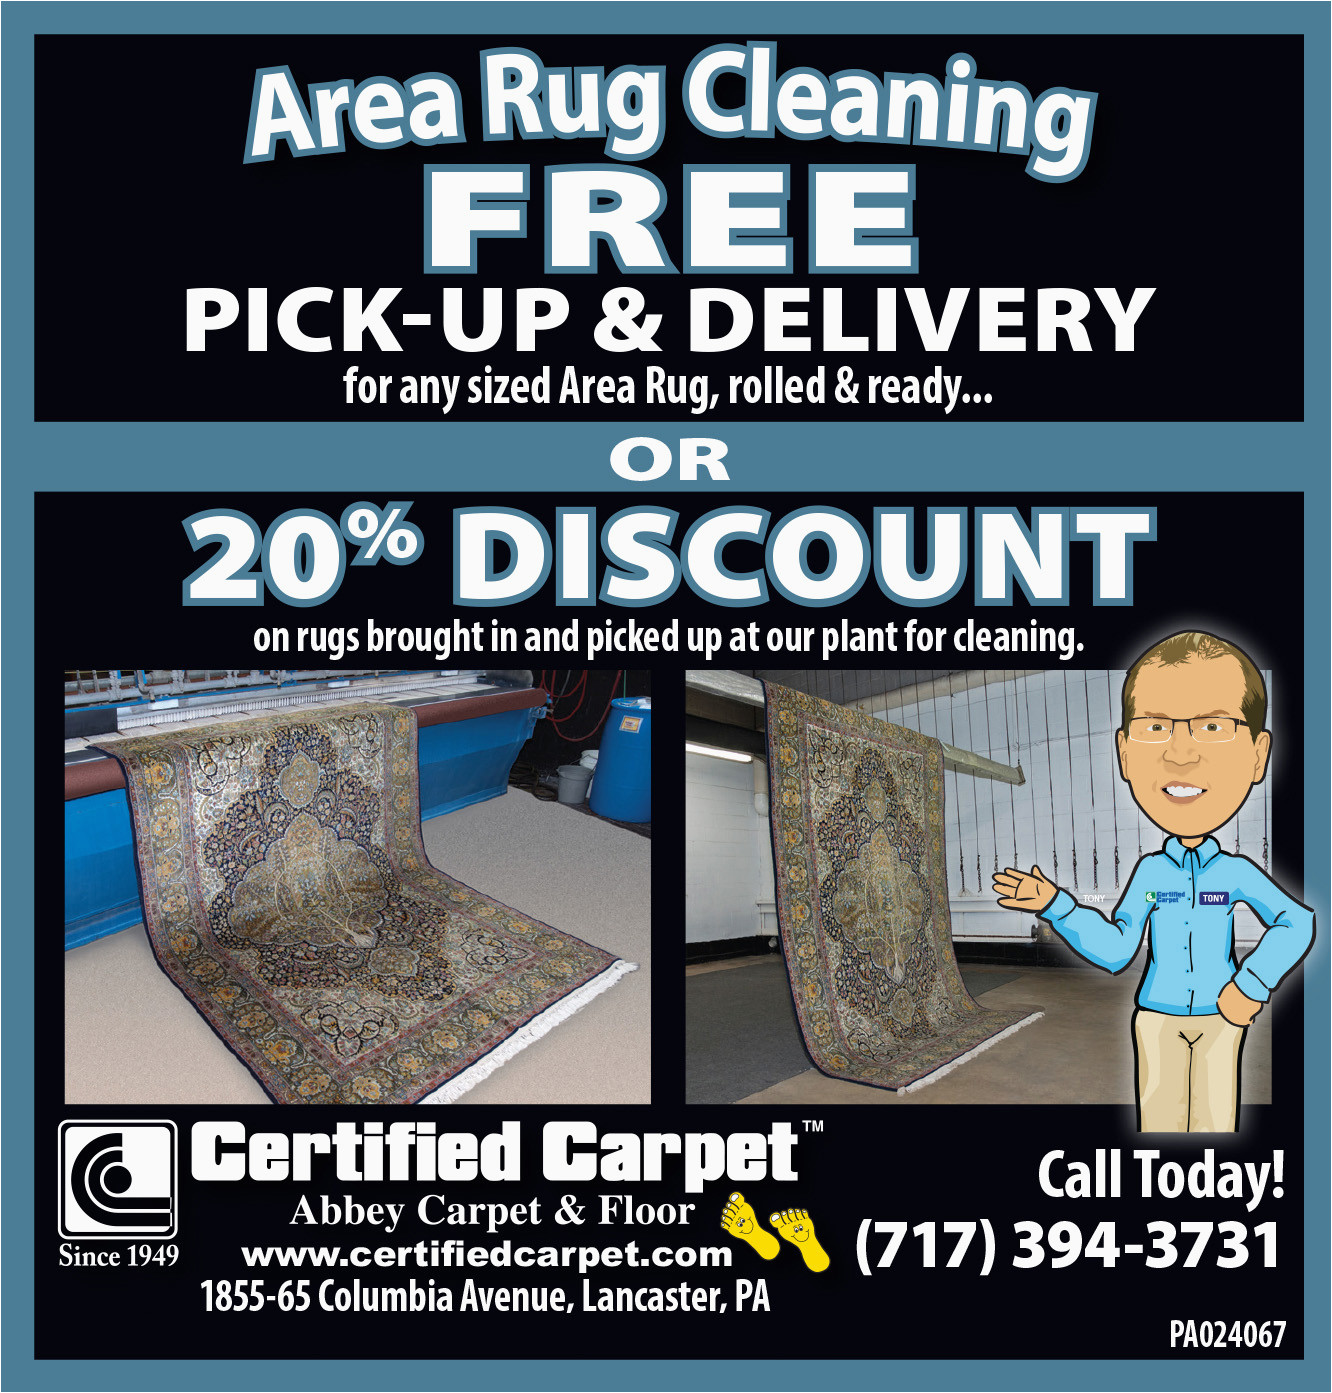 Area Rug Cleaning Pickup and Delivery area Rug Cleaning – Lancaster, Pa – Certified Carpet